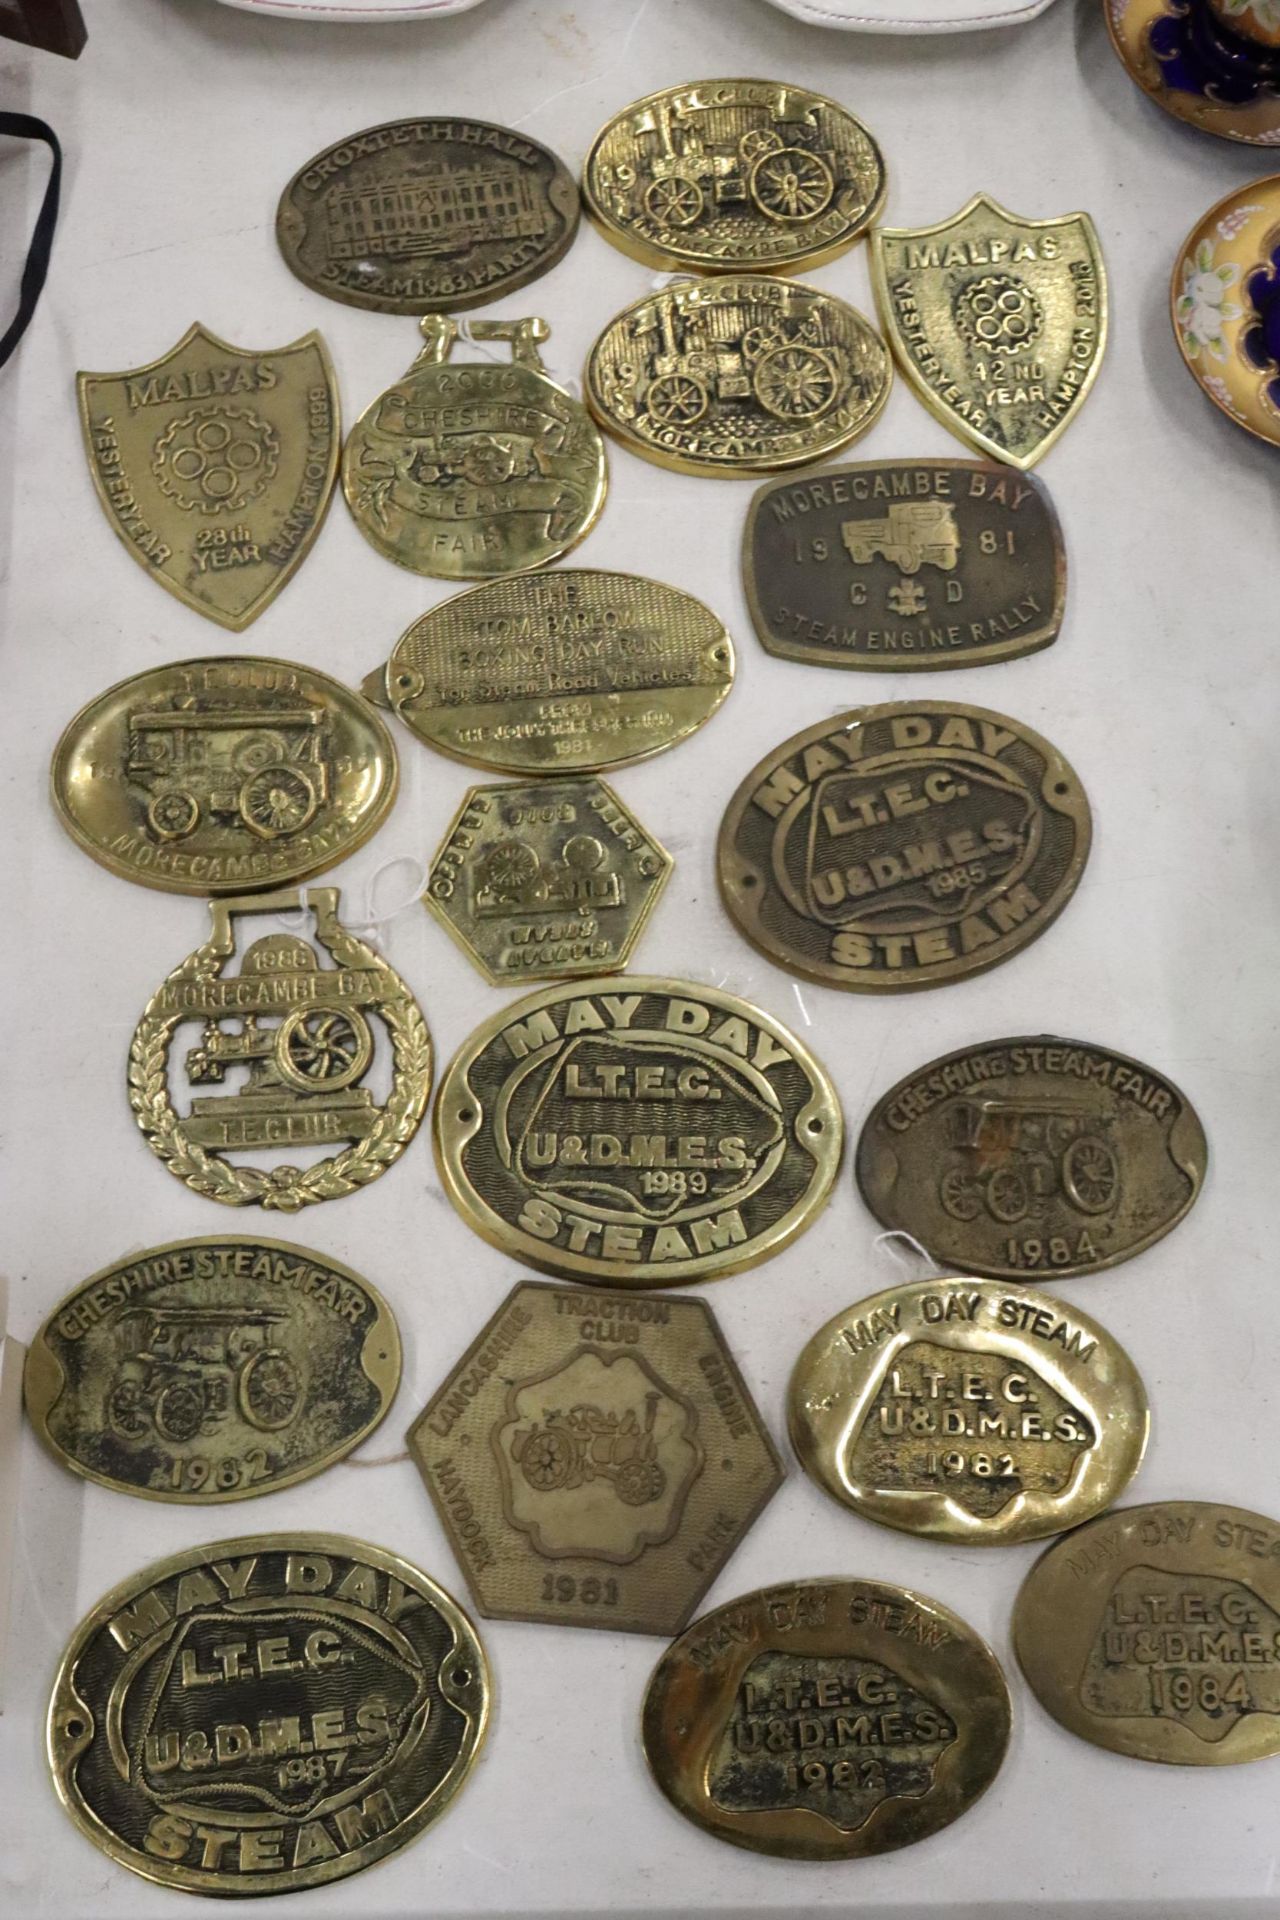 A LARGE COLLECTION OF BRASS STEAM RALLY PLAQUES - 20 IN TOTAL - Image 4 of 10